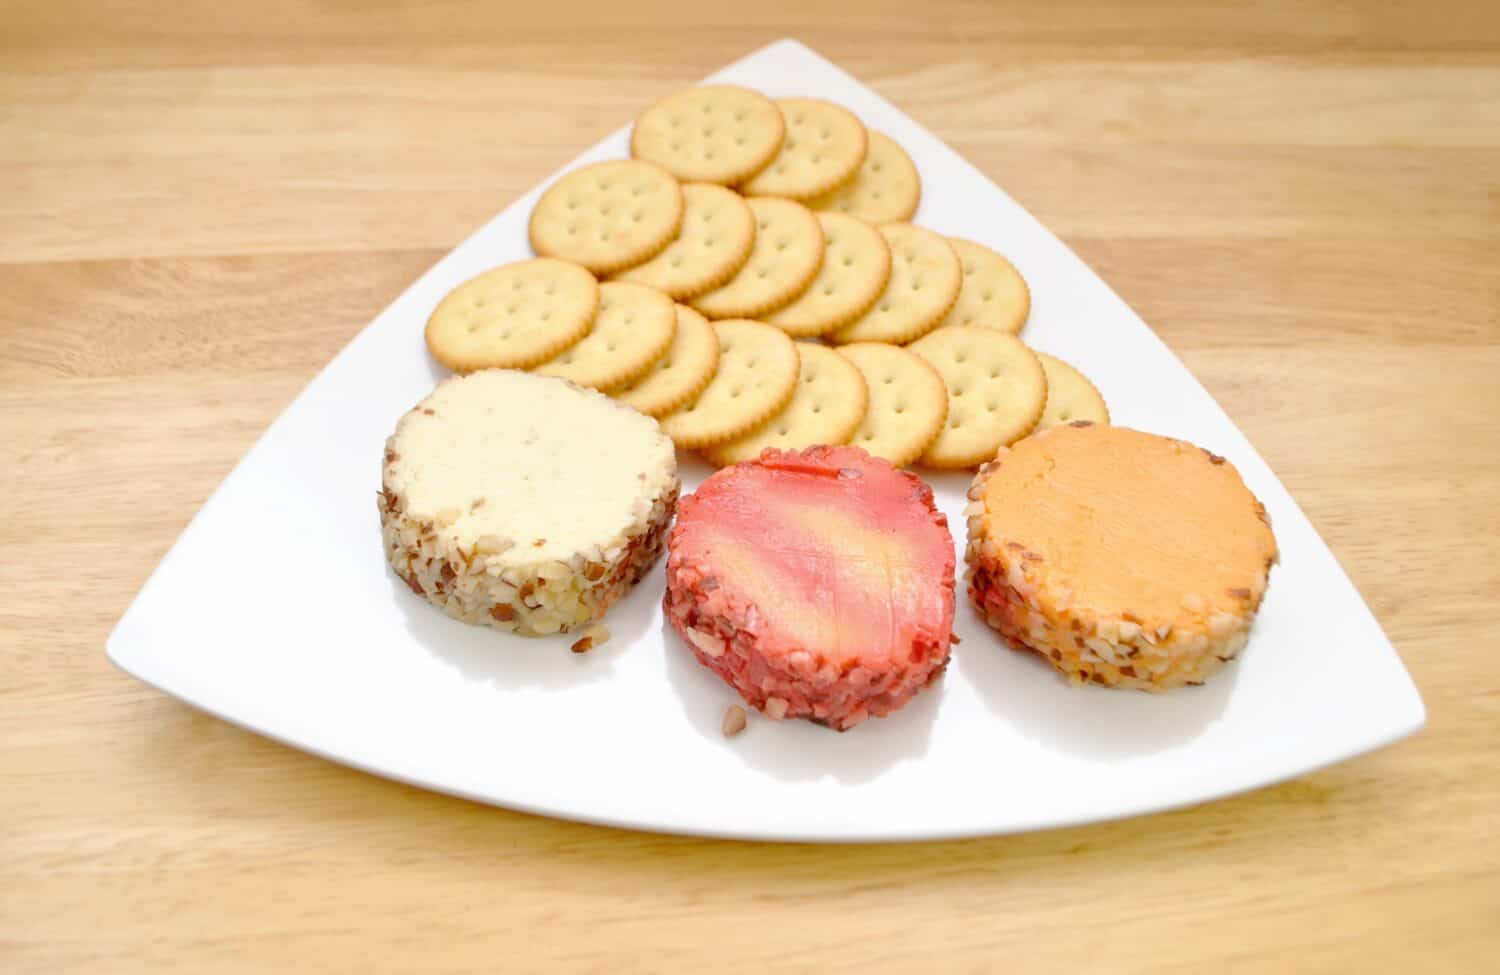 Cheddar Cheese Log Slices on a Plate with Round Crackers